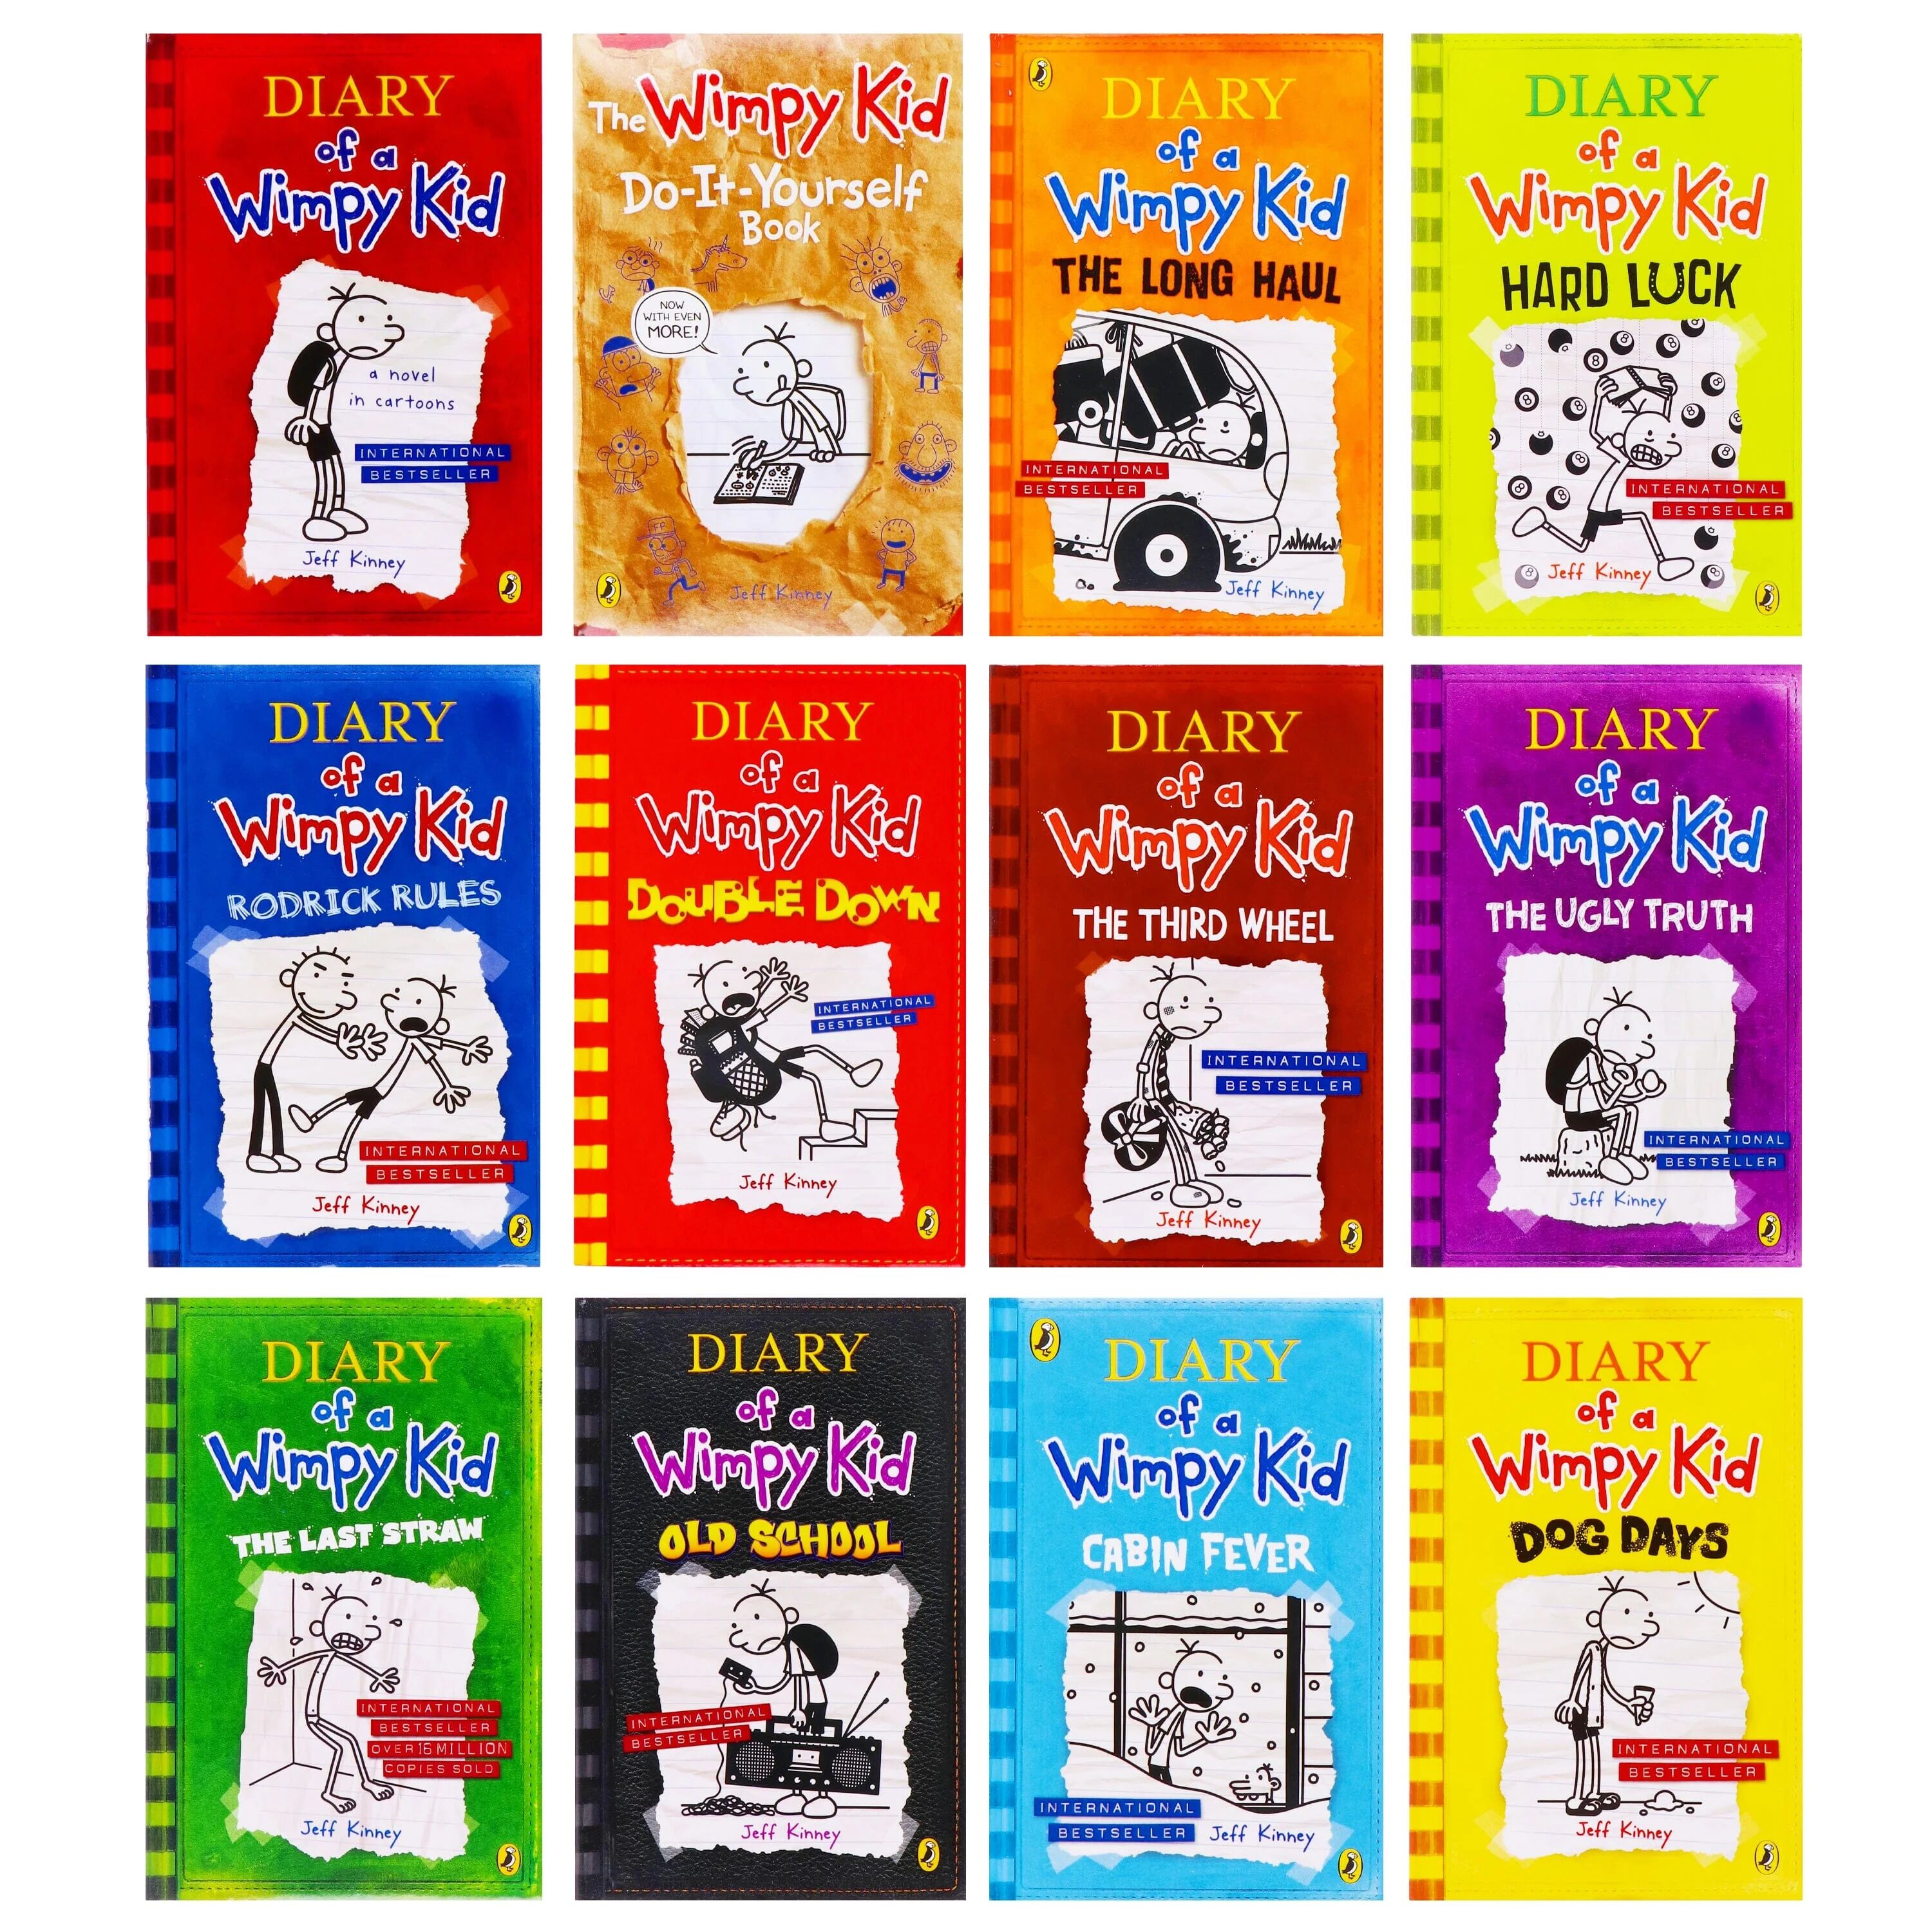 Diary of a Wimpy Kid by Jeff Kinney 12 Books Collection Box Set - Ages 7-12 - Paperback Penguin